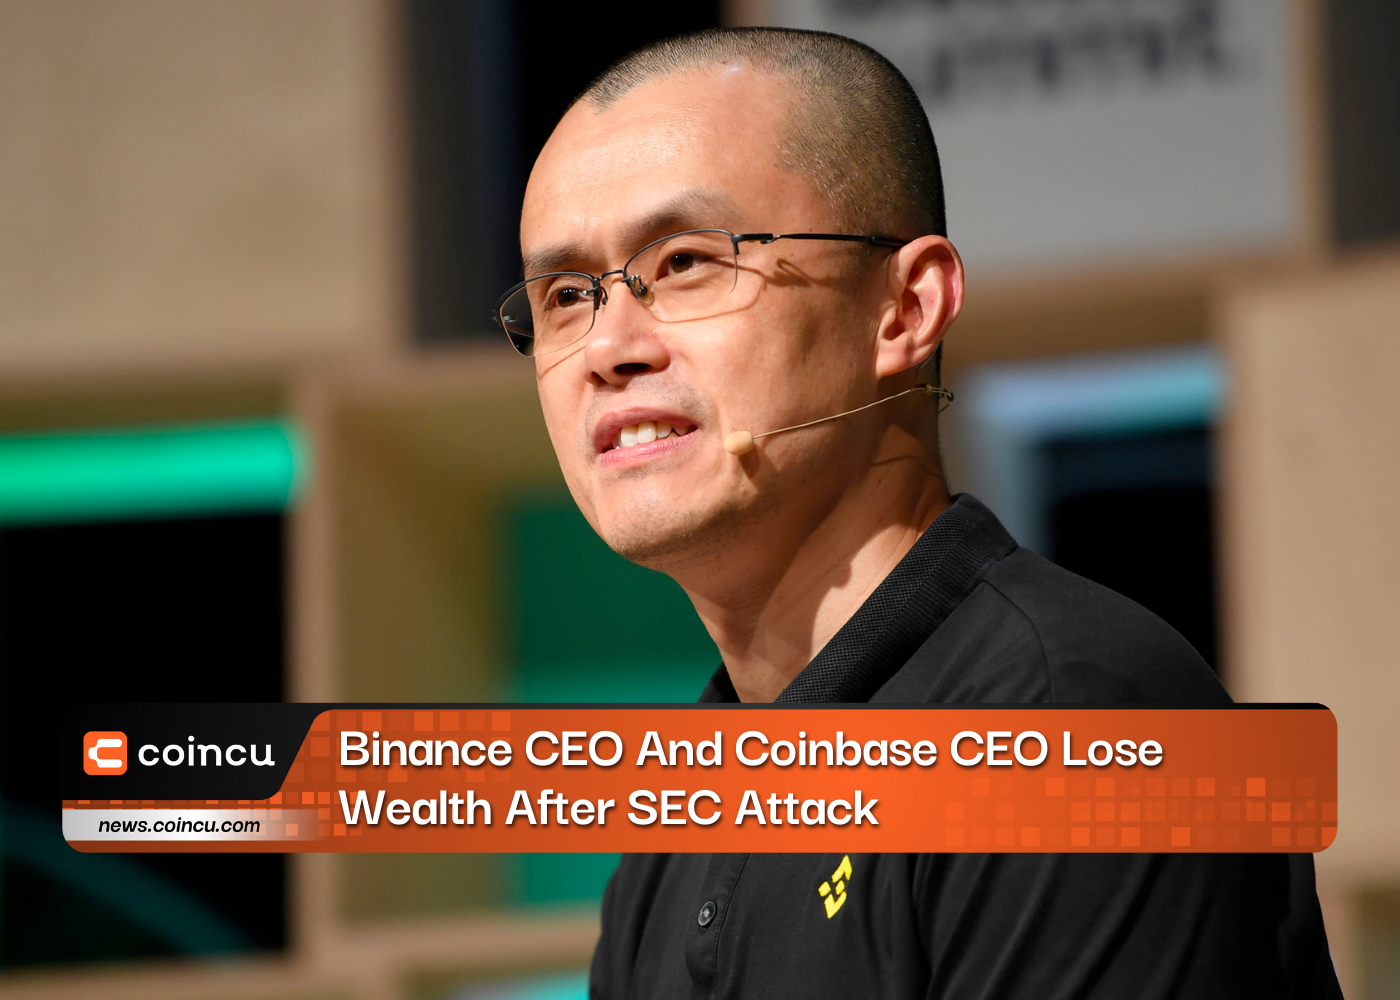 Binance CEO And Coinbase CEO Lose Wealth After SEC Attack